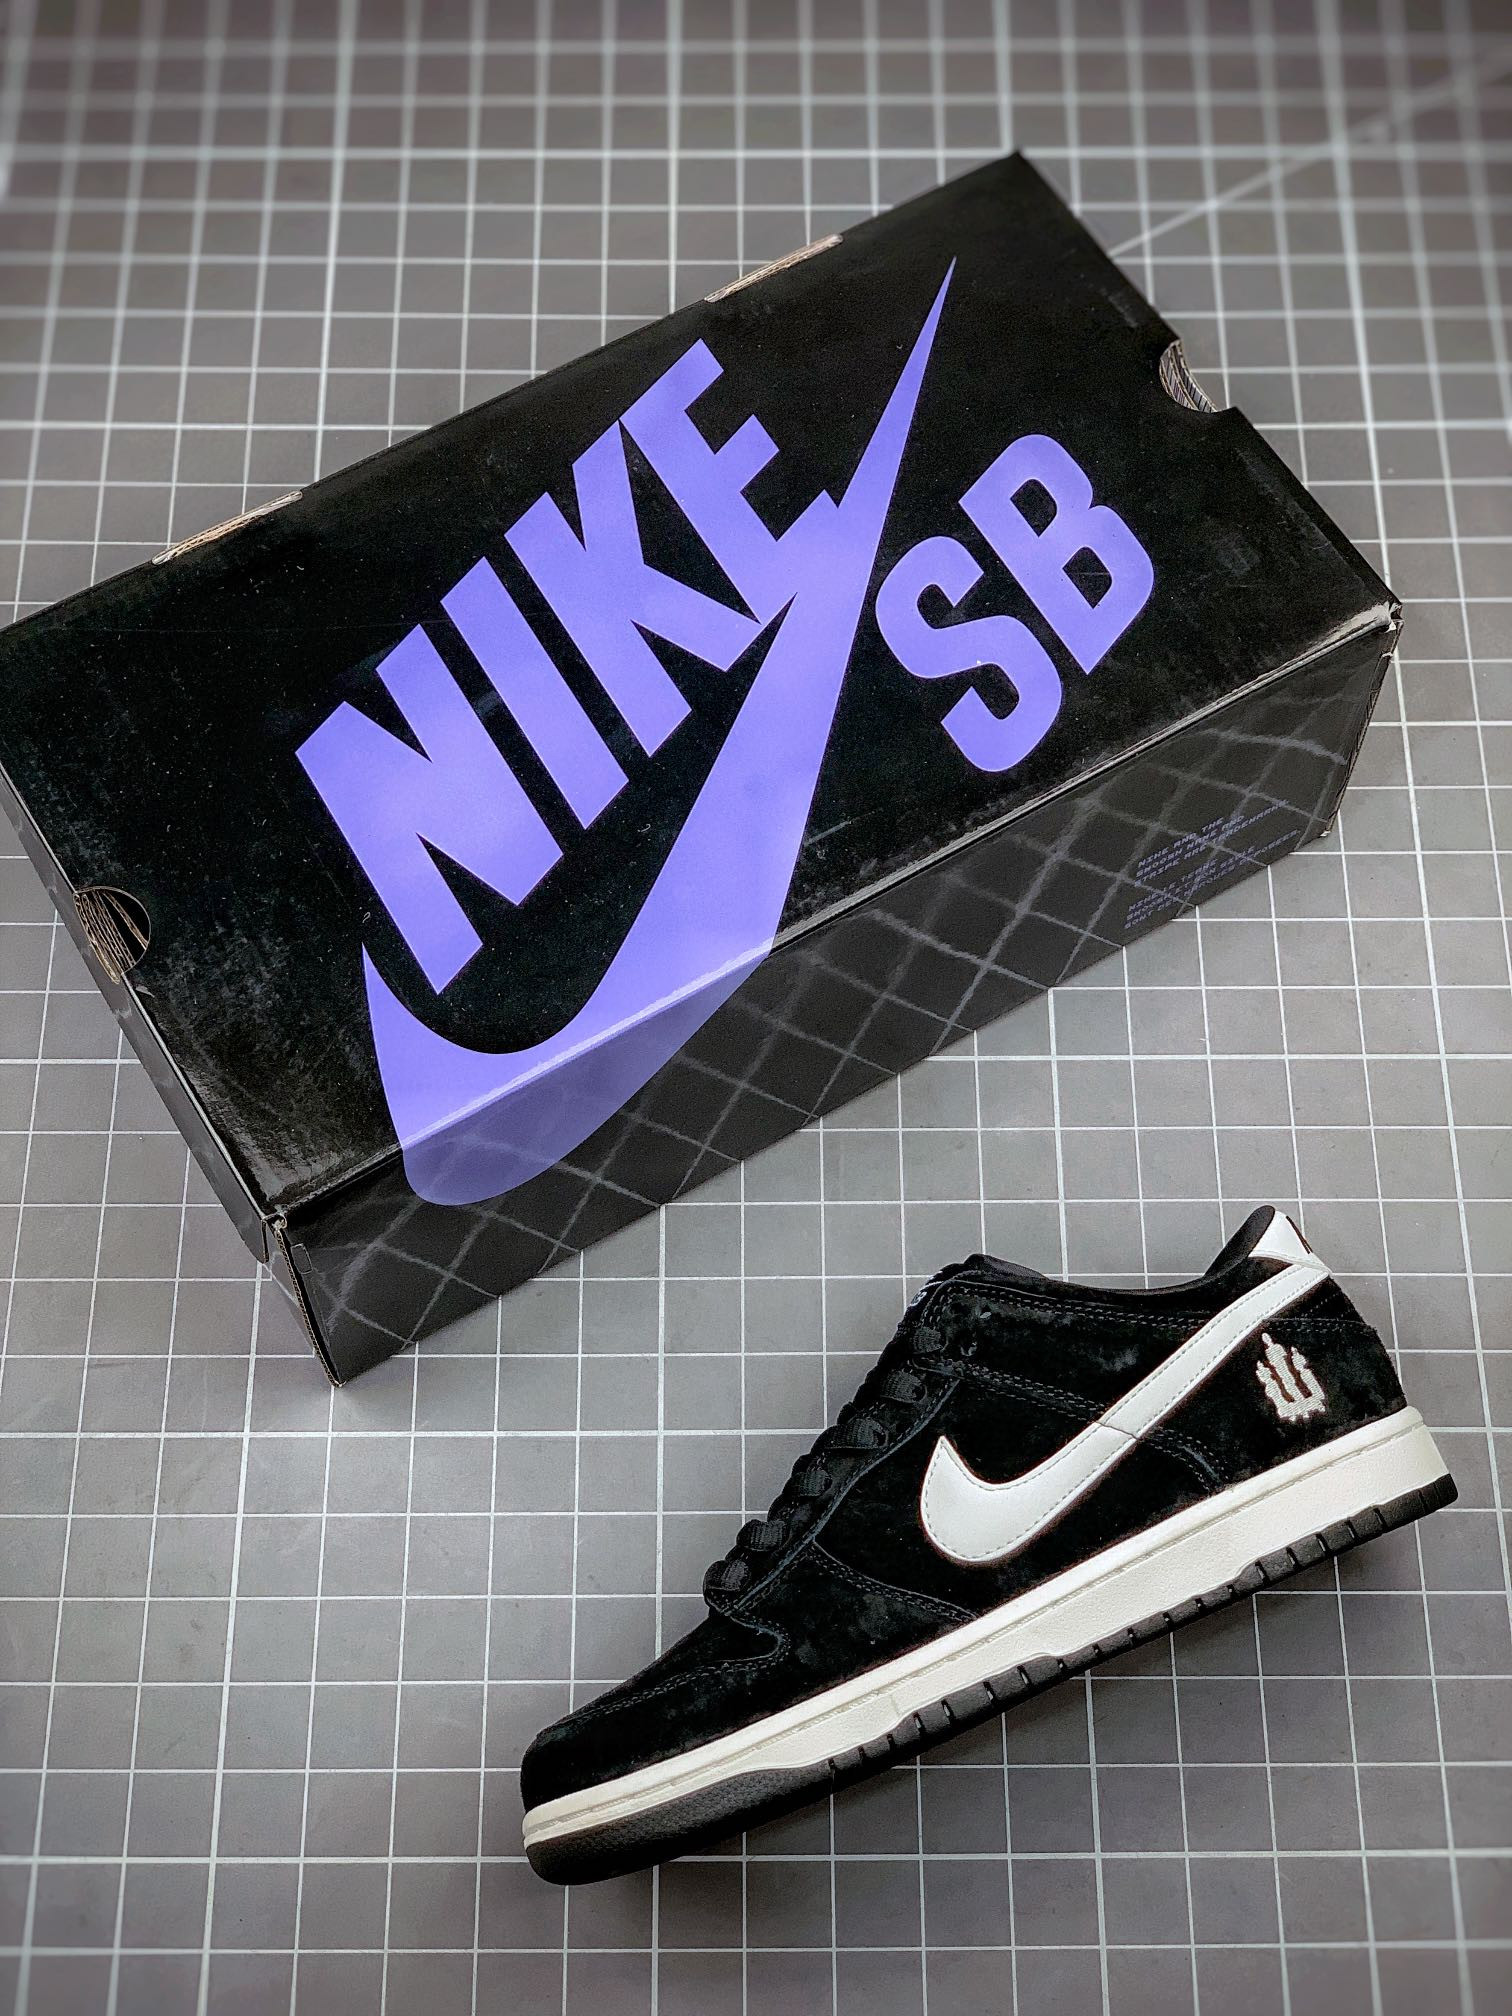 Nike SB Dunk Low Wiegers White Black 304292-014 For Sale